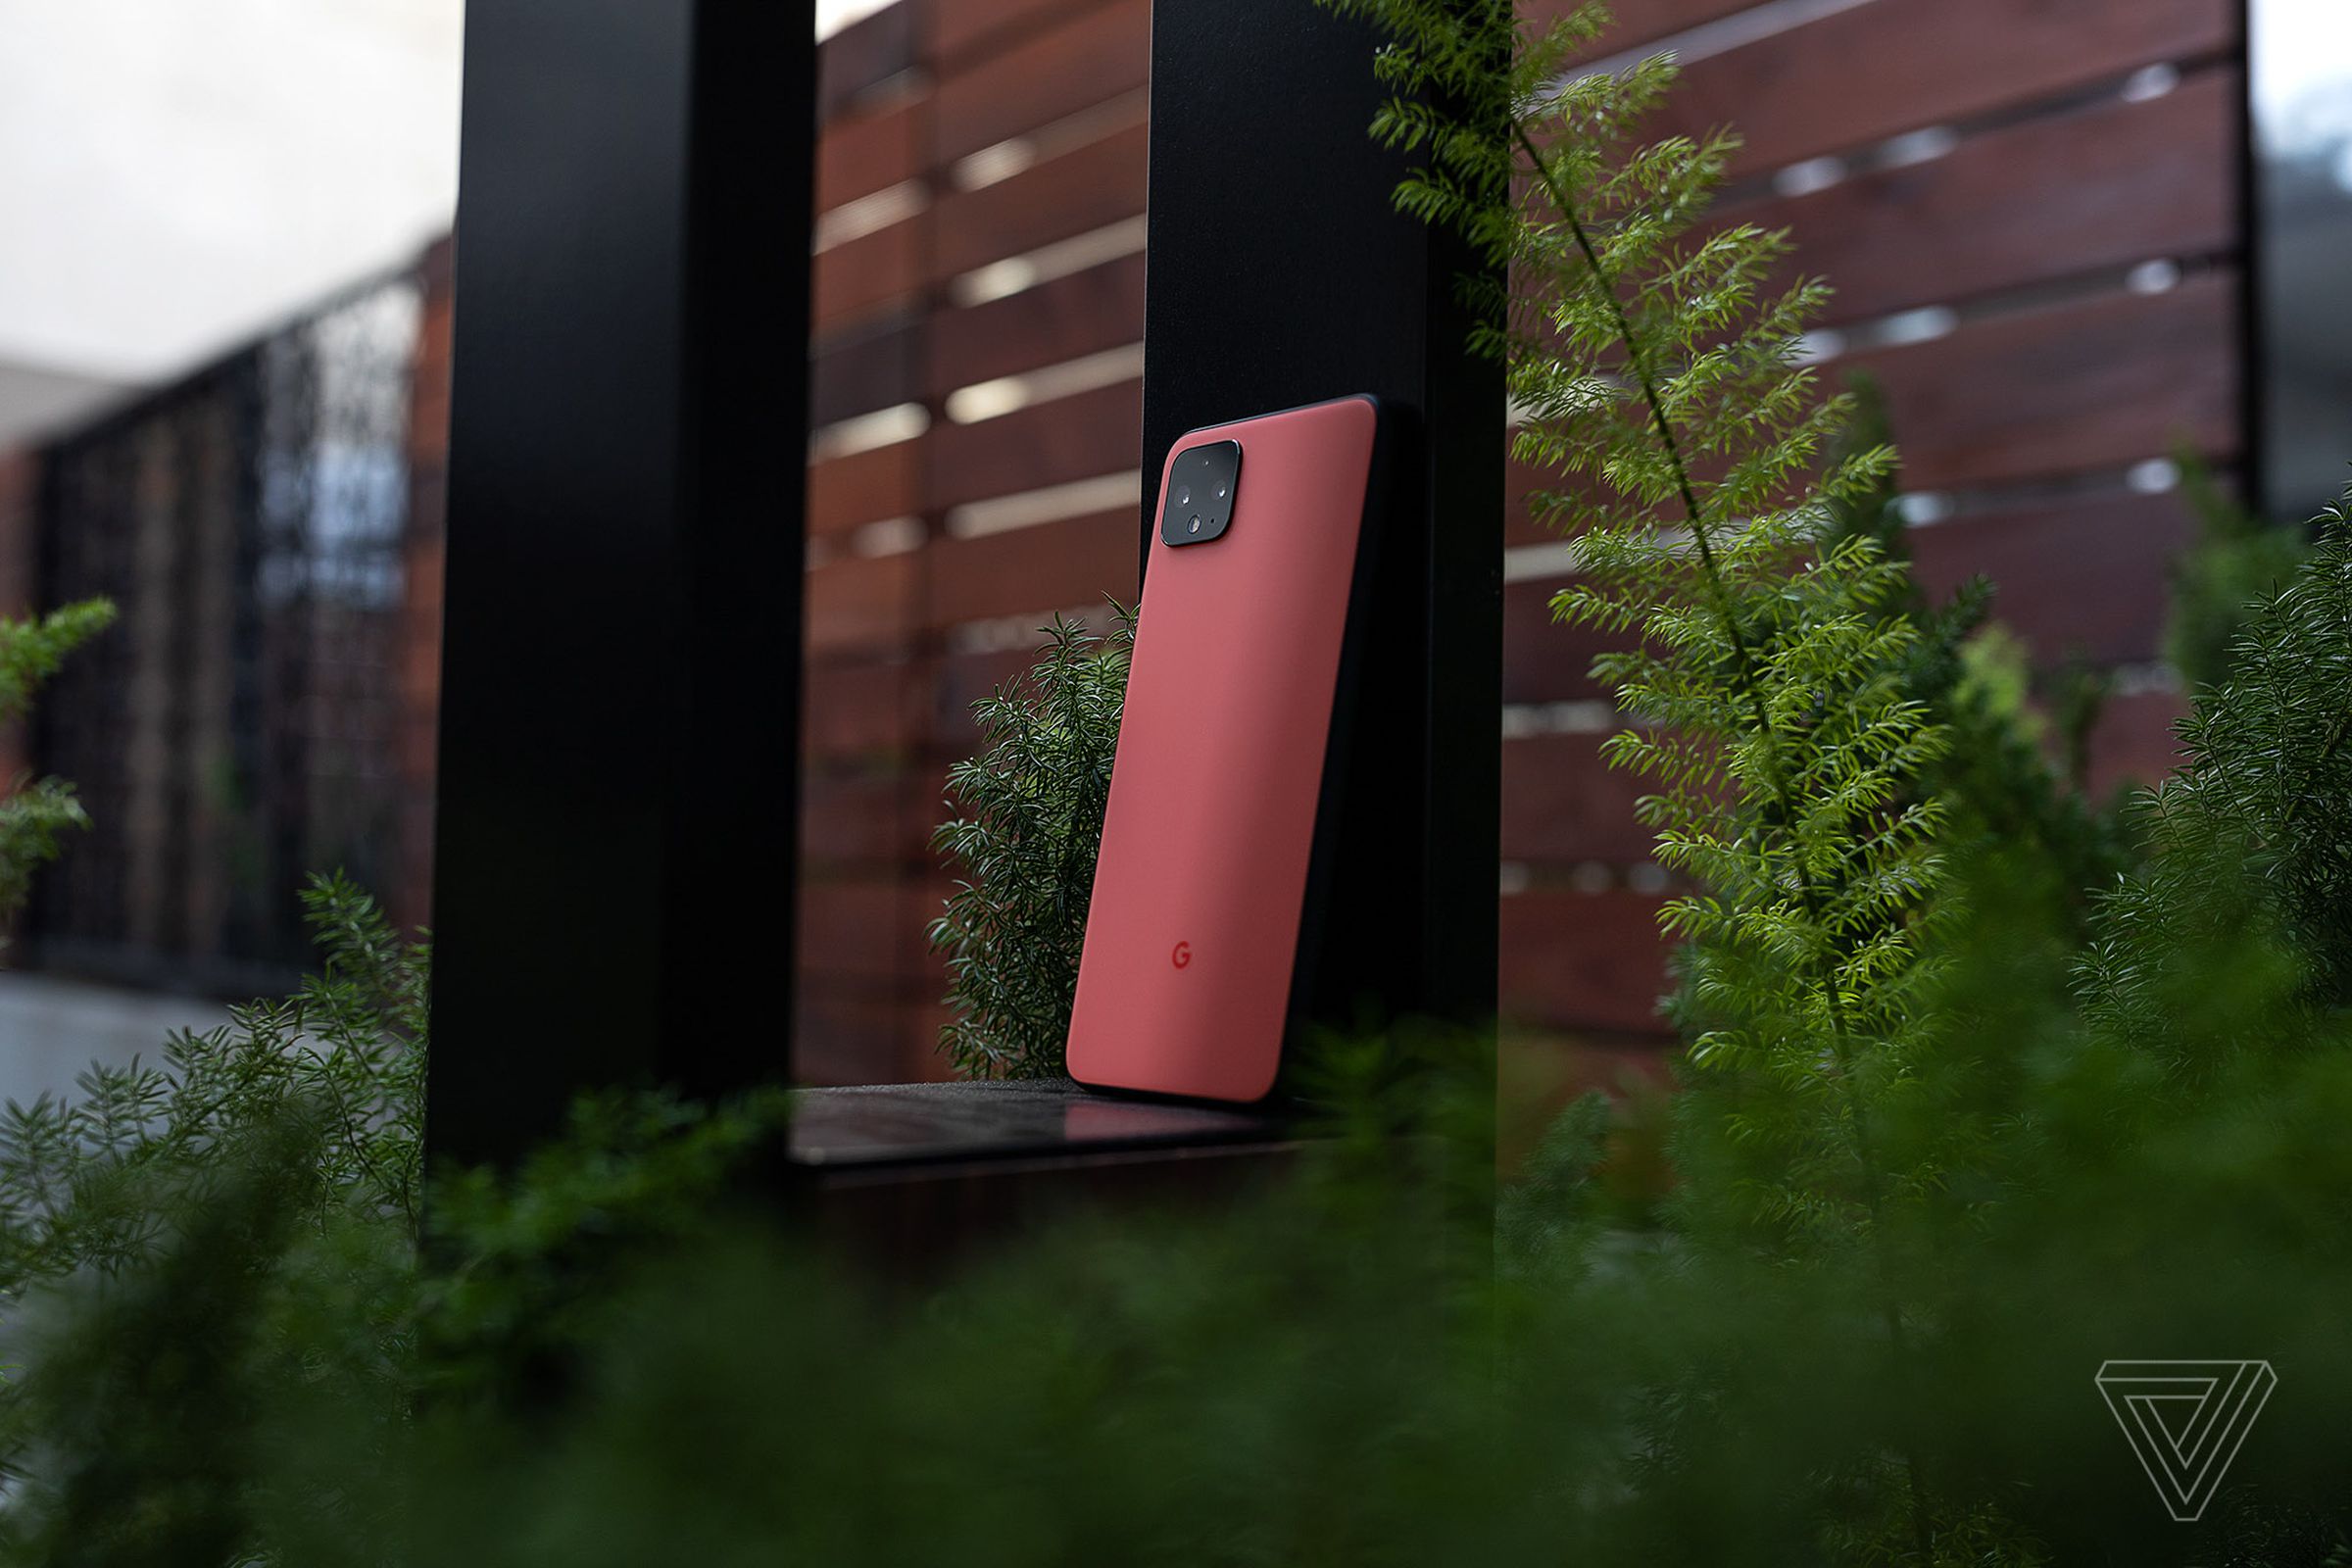 The Google Pixel 4 leaning against a small structure outdoors